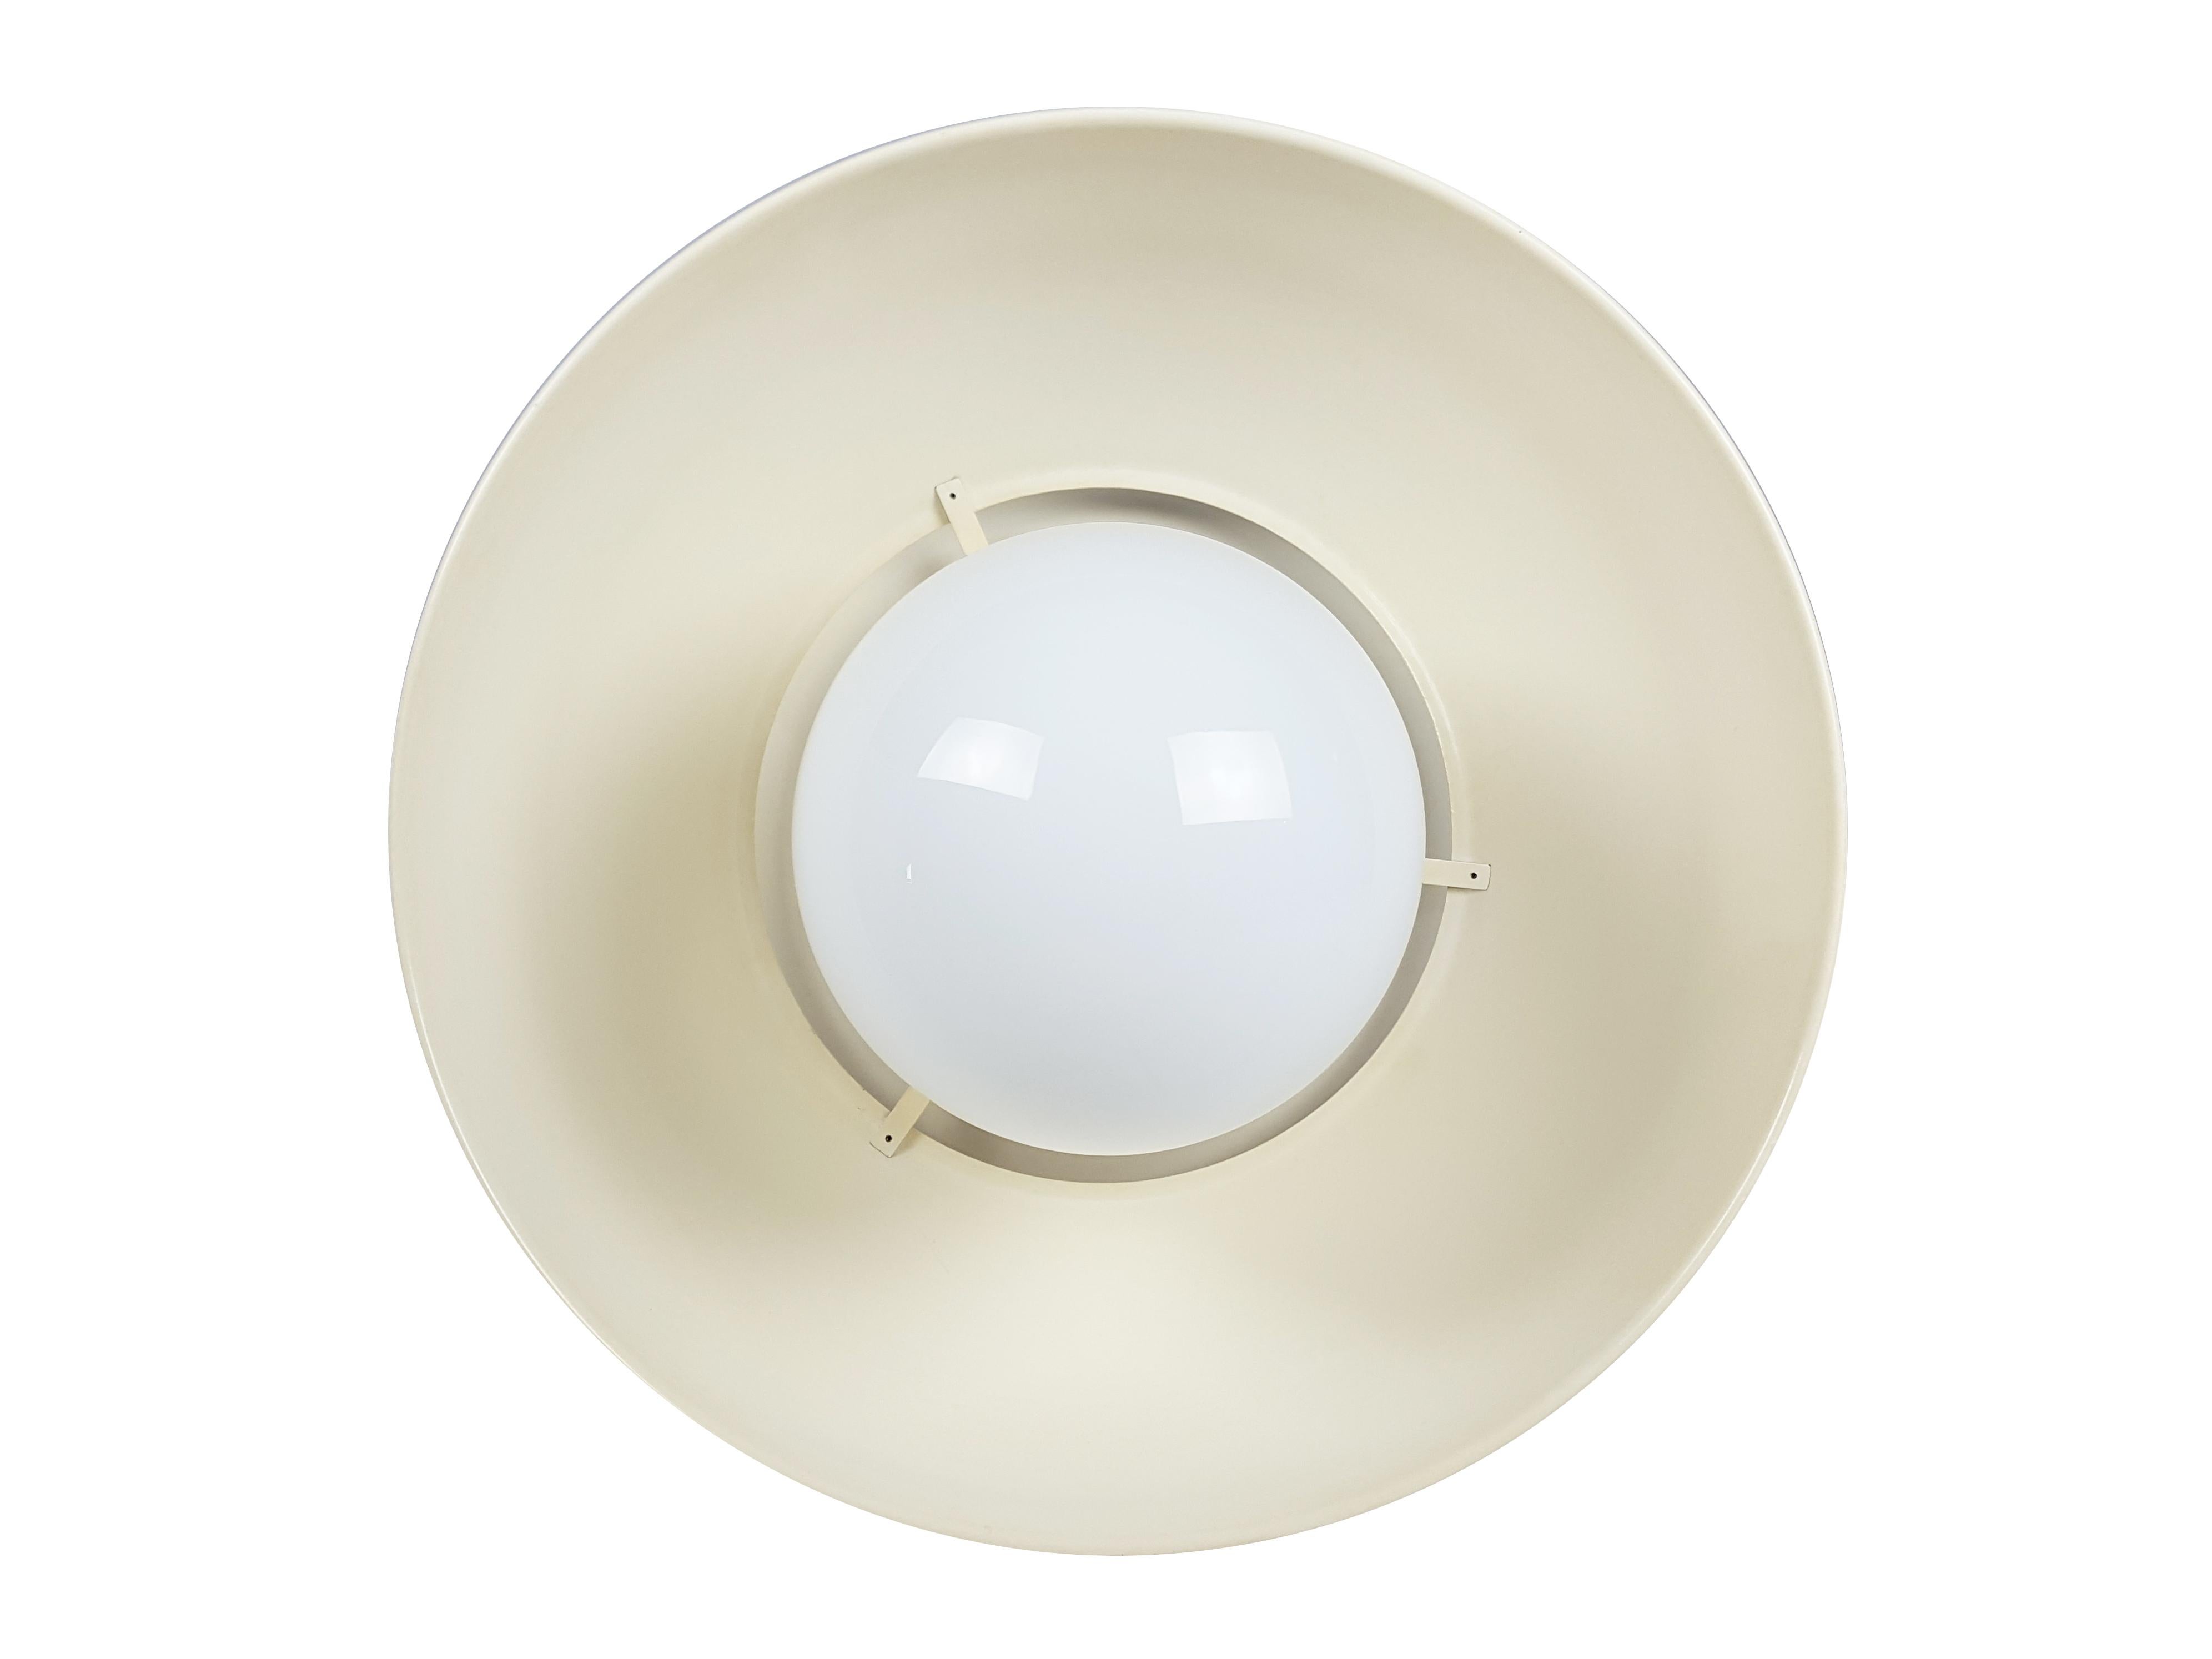 This vintage pendant was produced by Artemide with painted brass and metal shades and white opaline glass sphere. The white paint has turned yellow over time, taking on a pleasant and warm ivory color. The pendant rod shows visible paint lossed: on